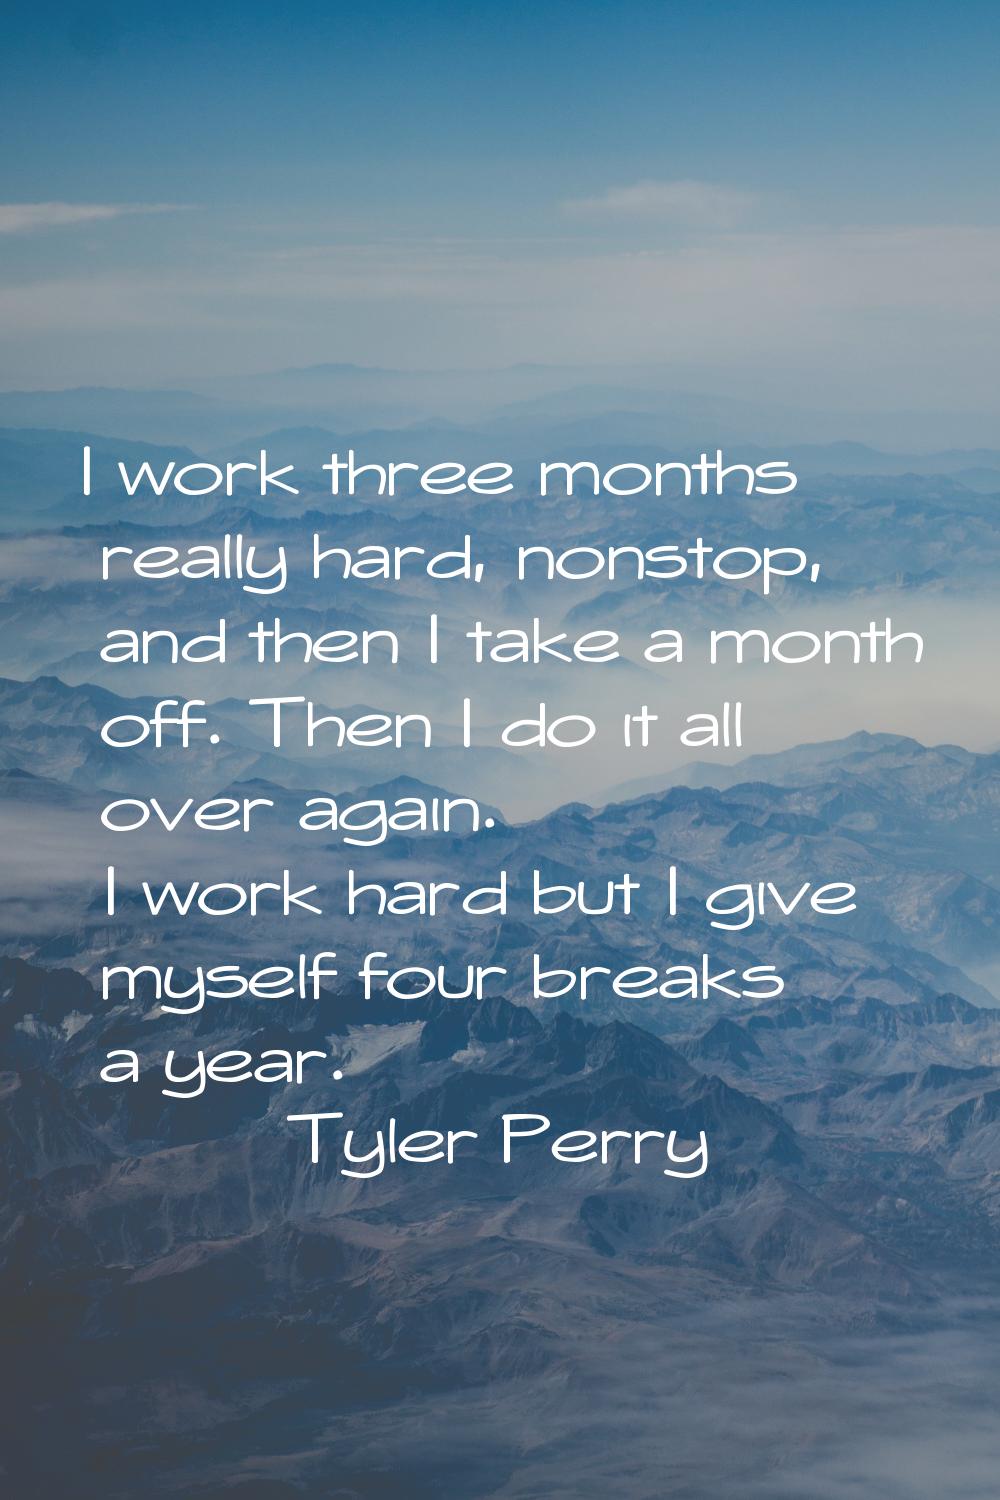 I work three months really hard, nonstop, and then I take a month off. Then I do it all over again.